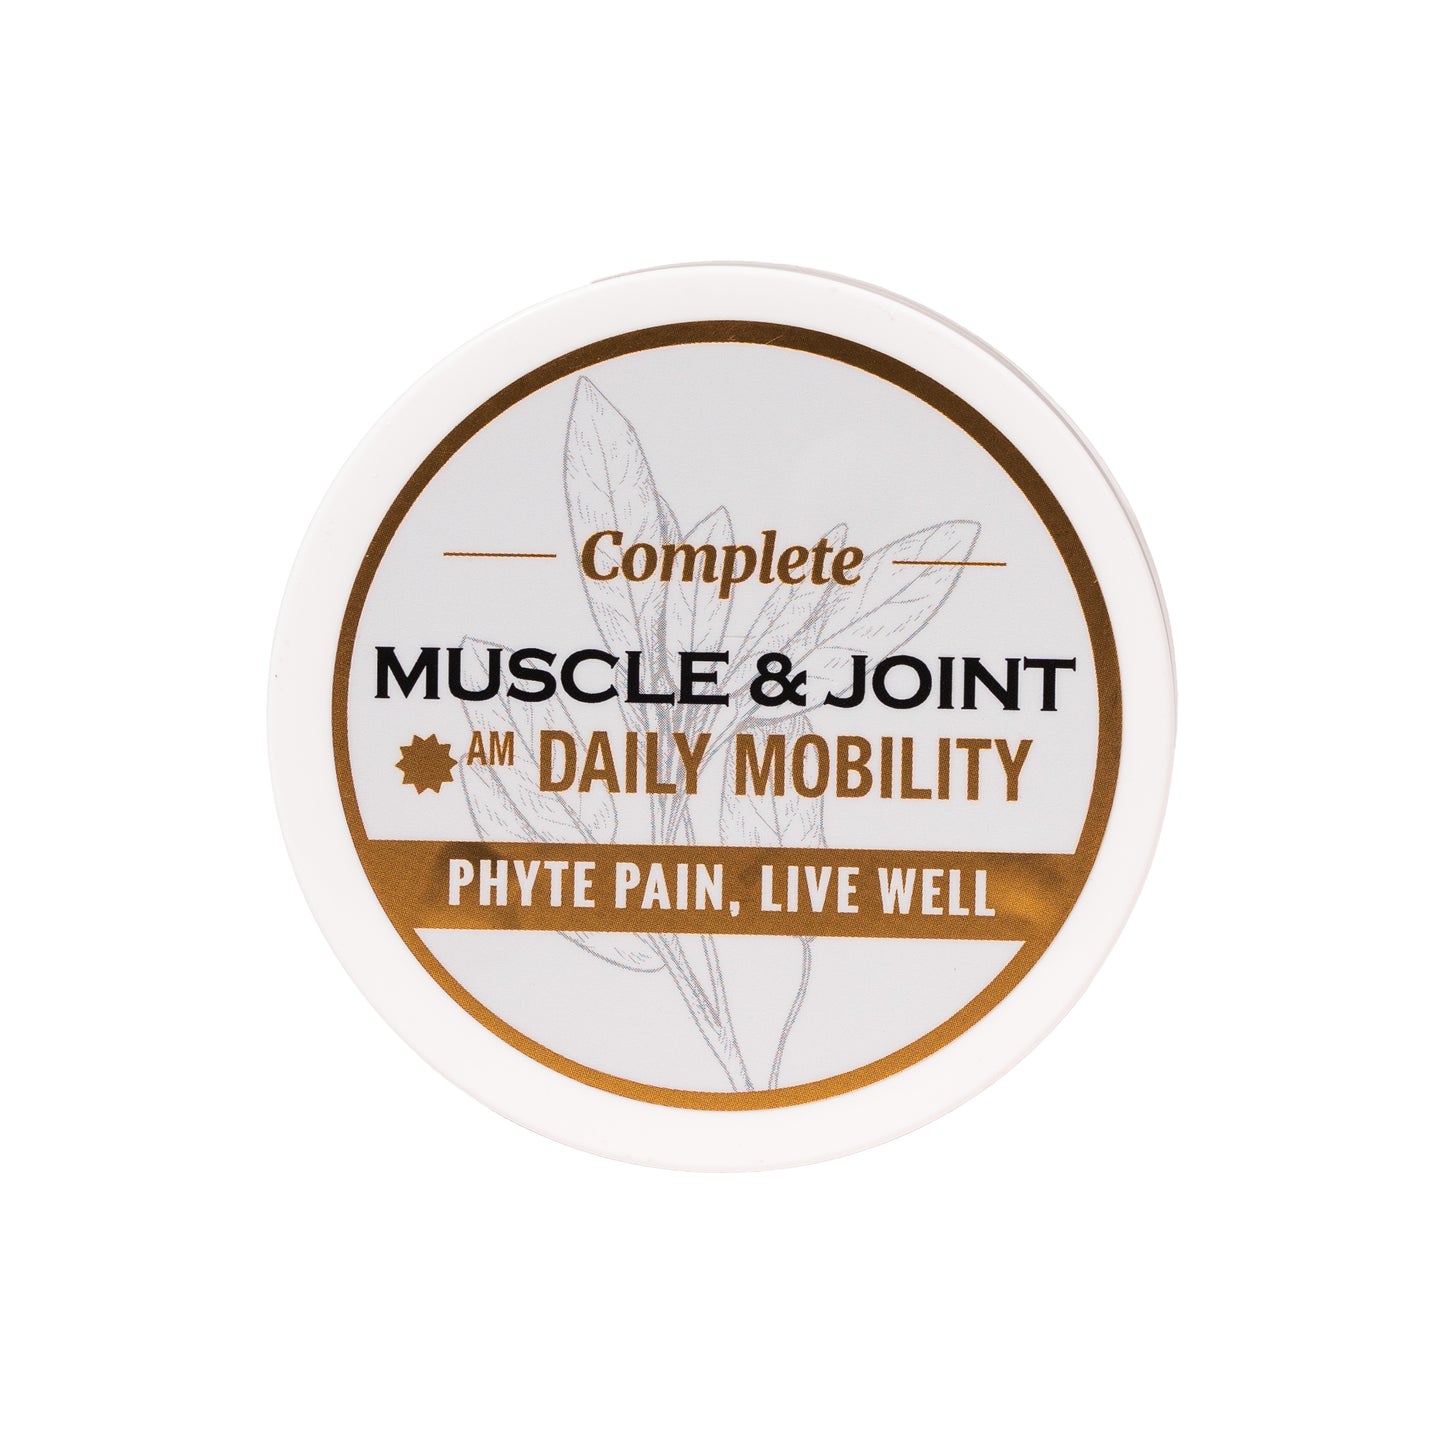 Muscle & Joint- AM Daily Mobility